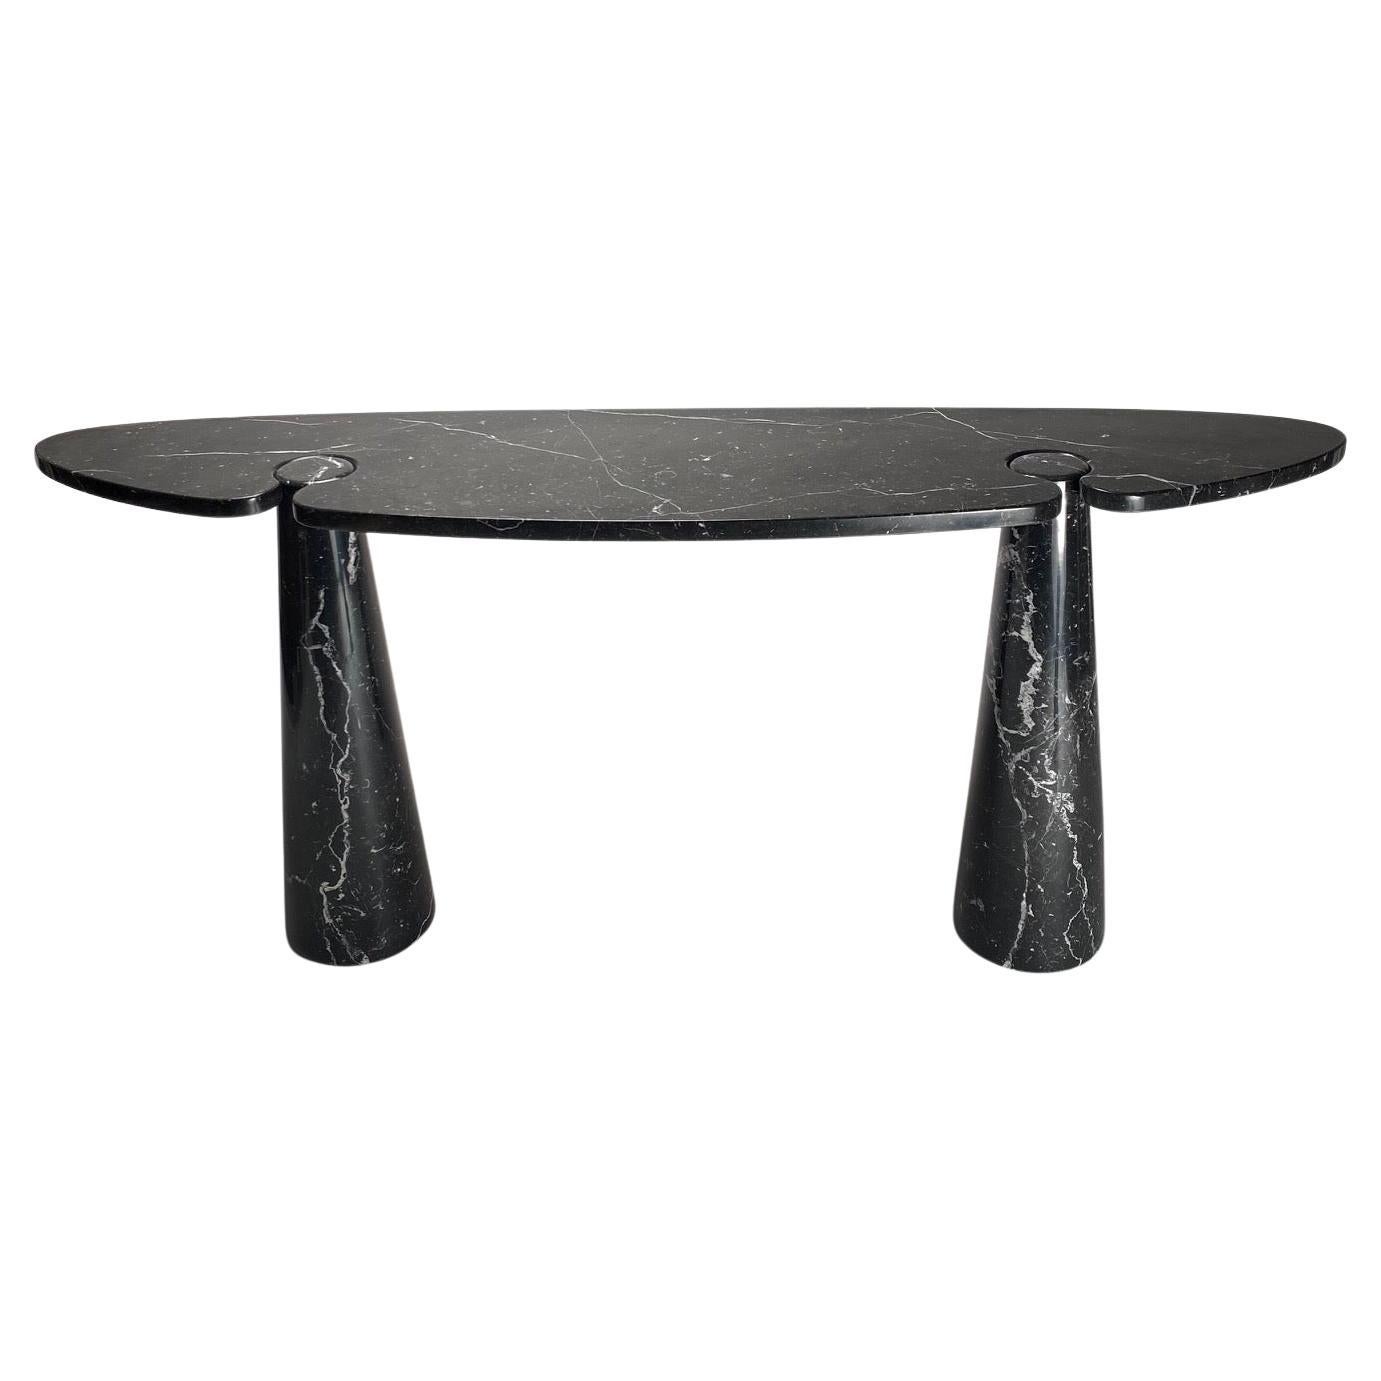 Angelo Mangiarotti, "Eros" series console, black Marquina marble. Skipper, Italy For Sale